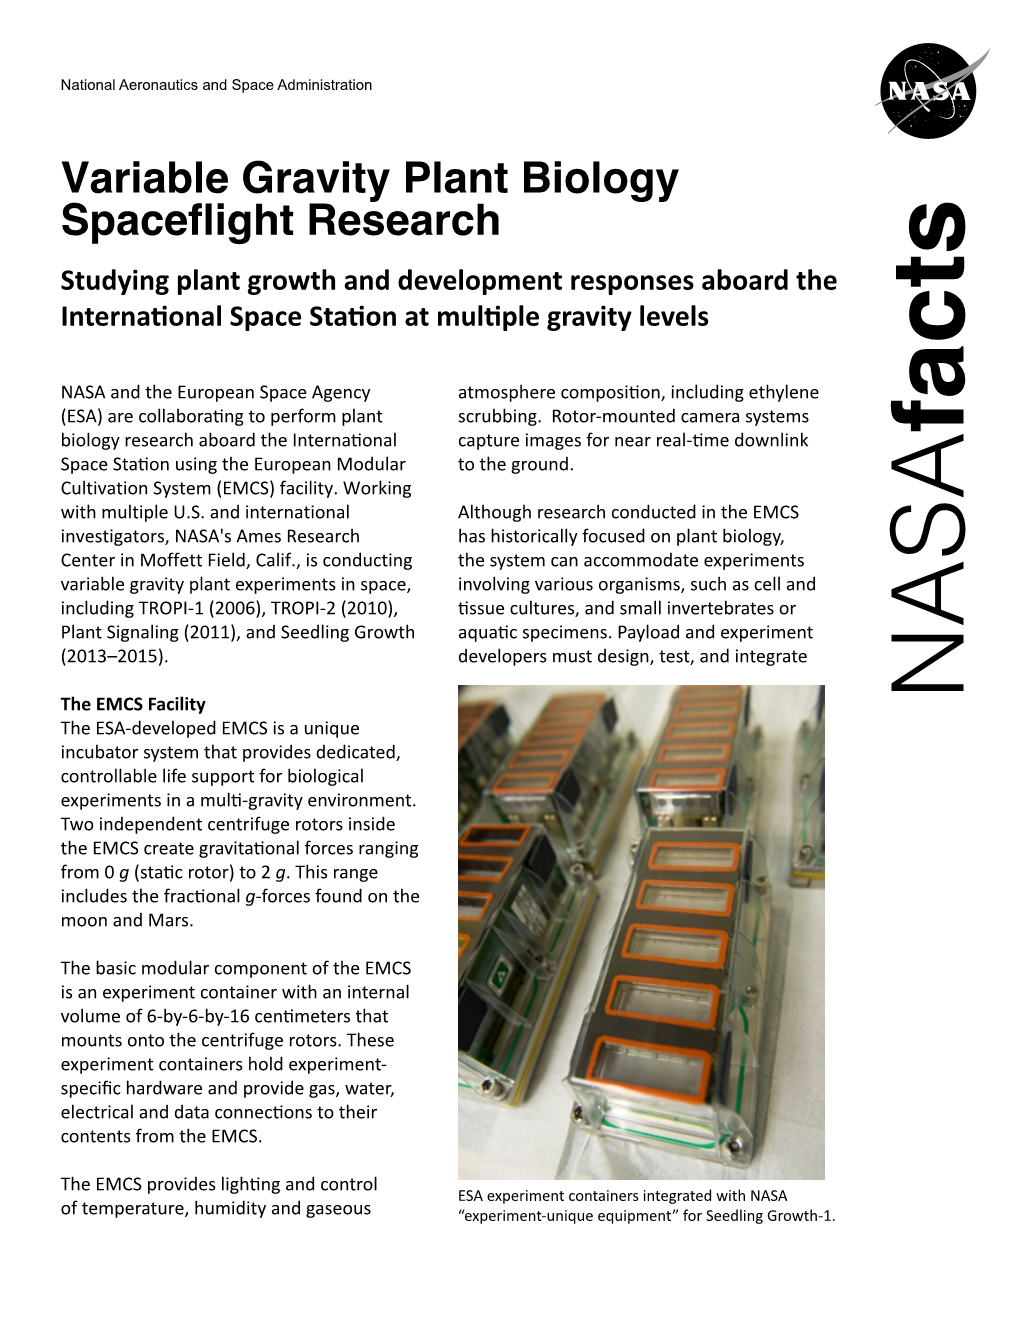 Variable Gravity Plant Biology Spaceflight Research Studying Plant Growth and Development Responses Aboard the International Space Station at Multiple Gravity Levels